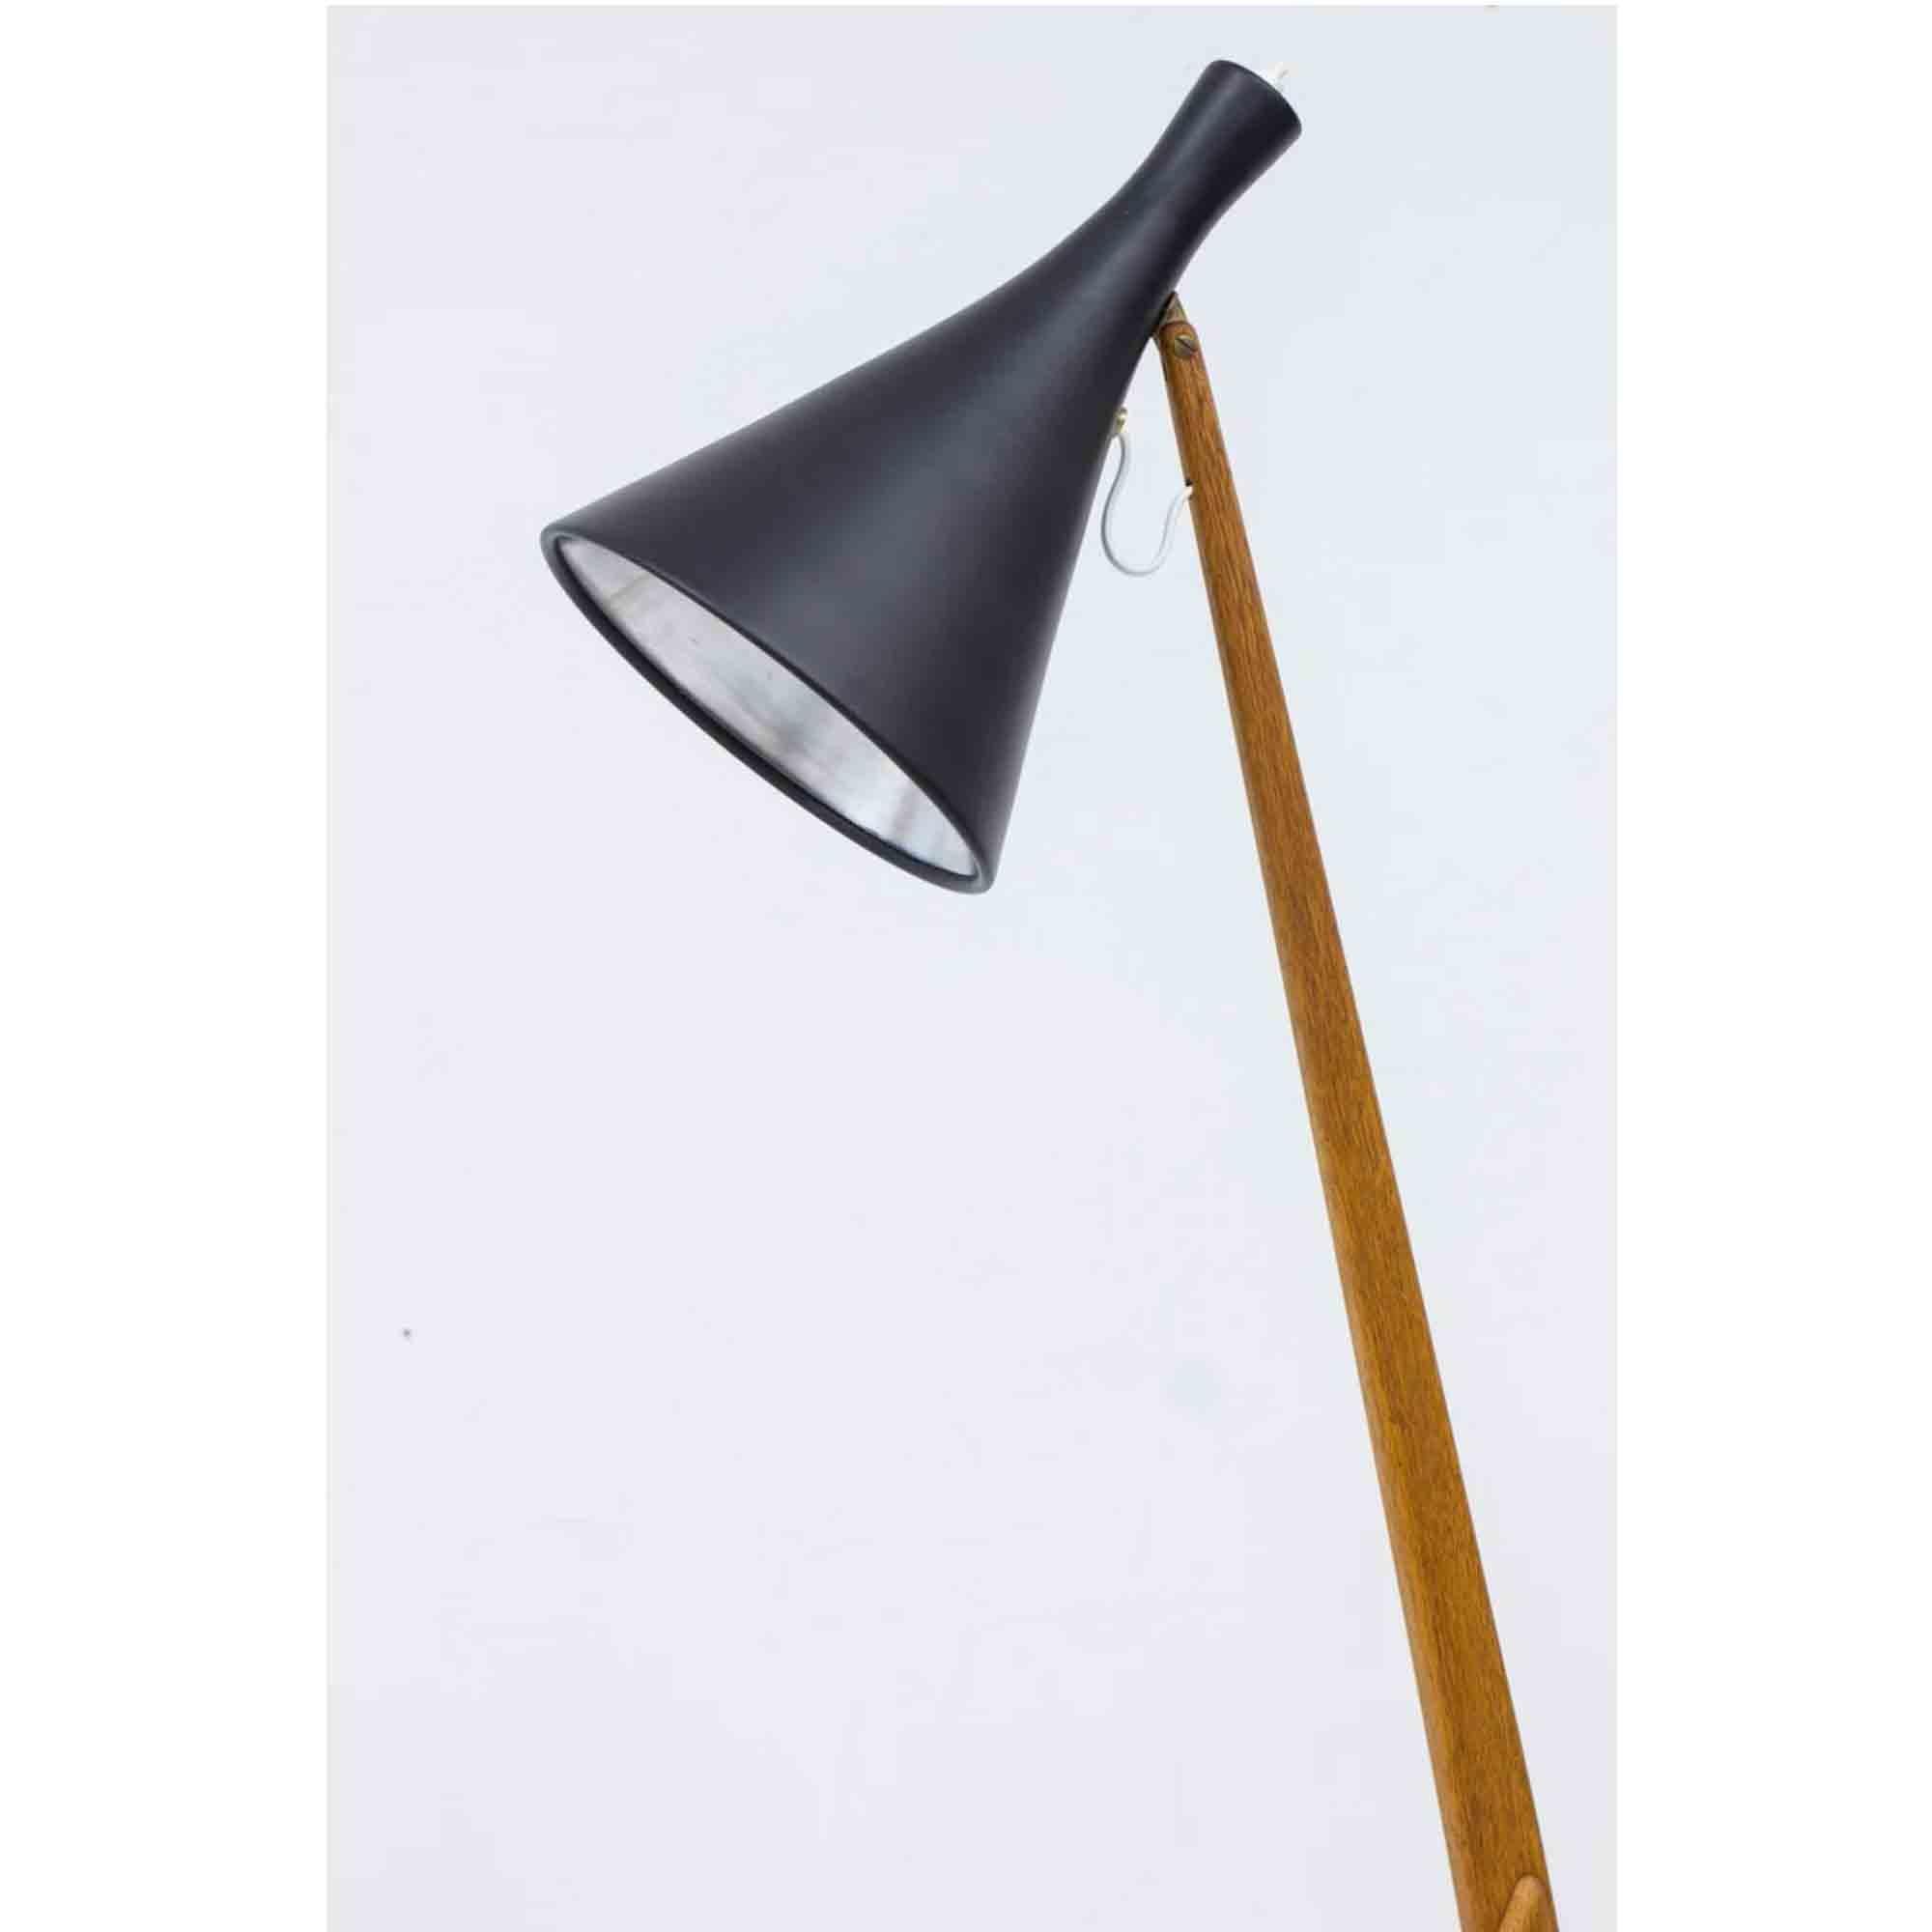 A brilliant design, with a clear aesthetic from Uno & Östen Kristiansson for Luxus. This floor lamp has a teak base supporting a shade that provides a soft glow in addition to directional light. The white electrical cord, well inserted in the